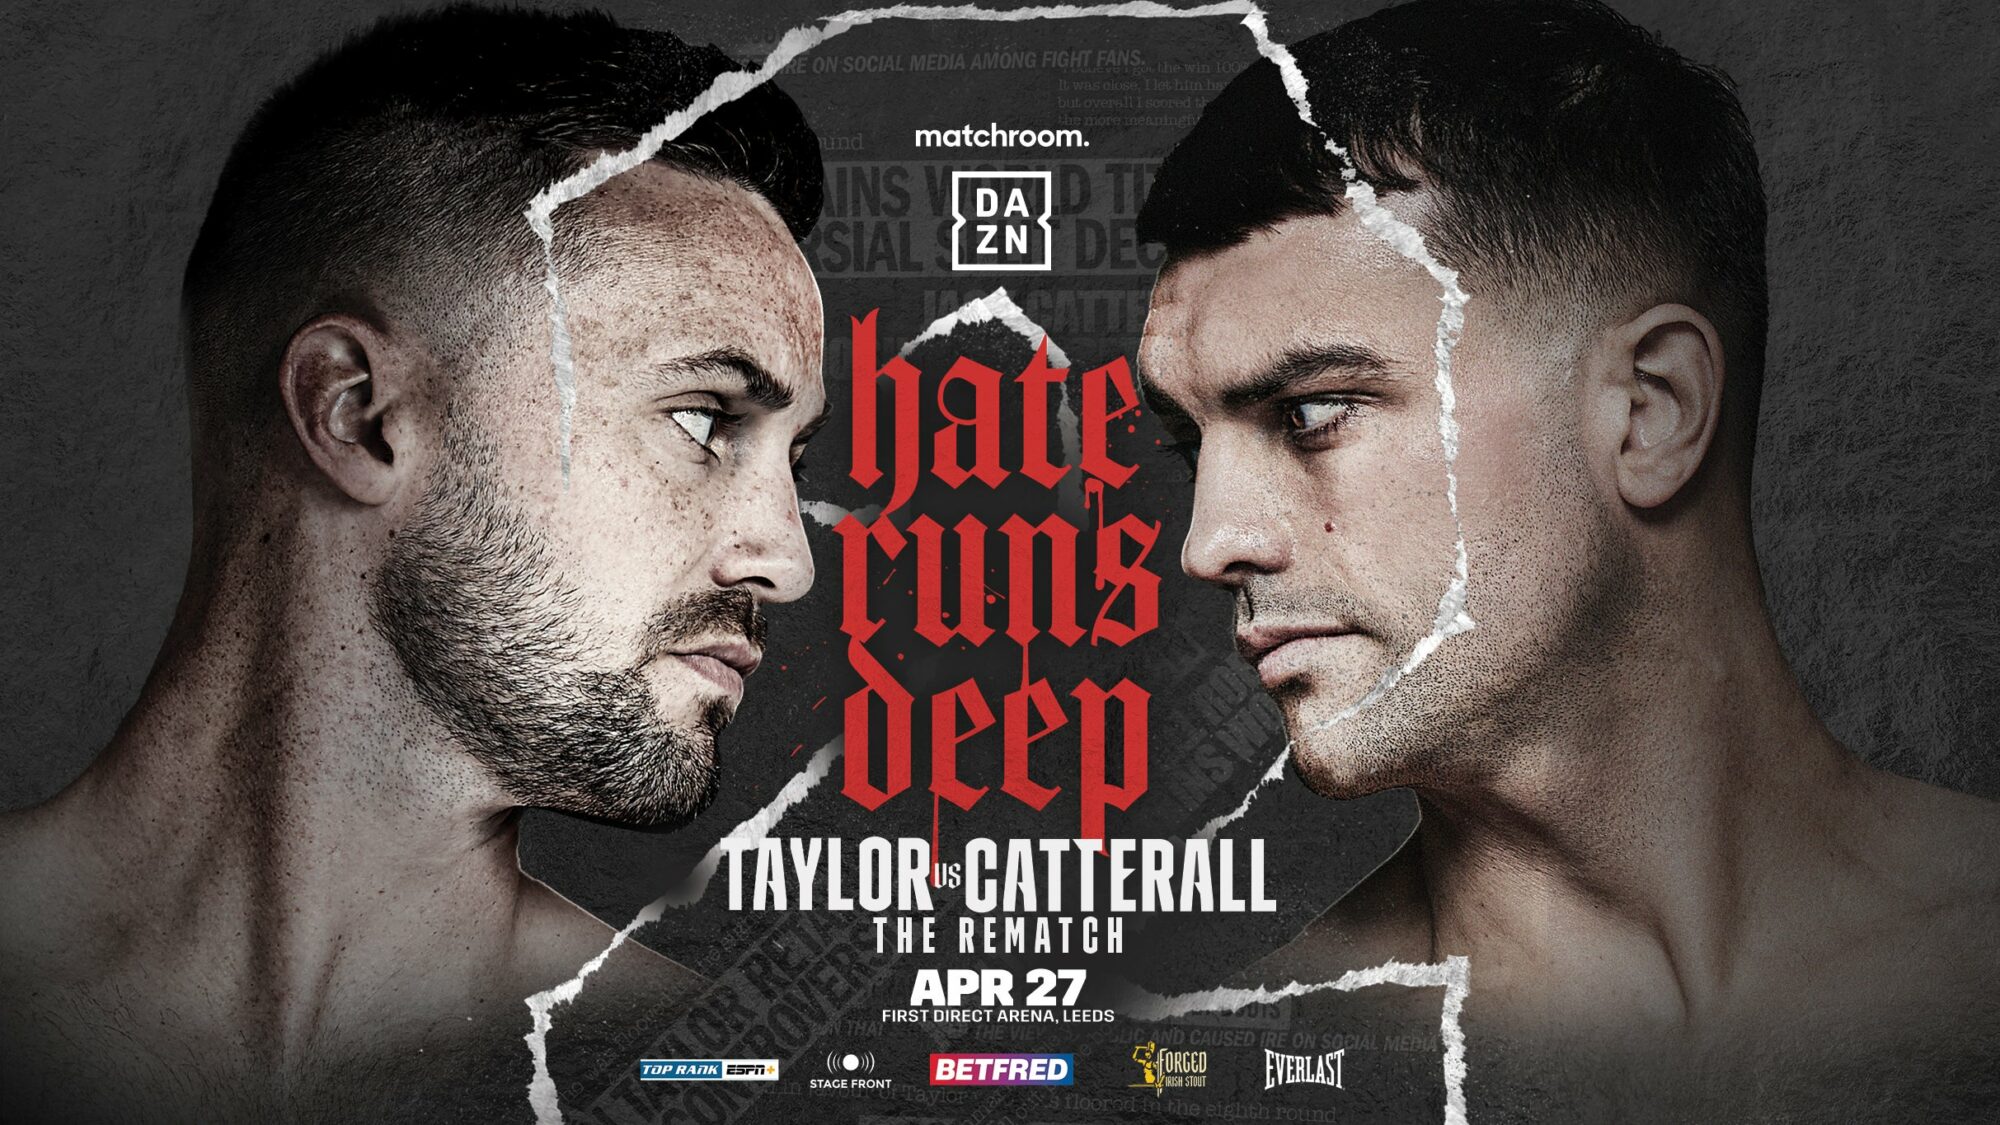 Image name Matchroom Boxing Josh Taylor vs Jack Catterall at First Direct Arena Leeds the 16 image from the post Matchroom Boxing: Josh Taylor vs Jack Catterall at First Direct Arena, Leeds in Yorkshire.com.